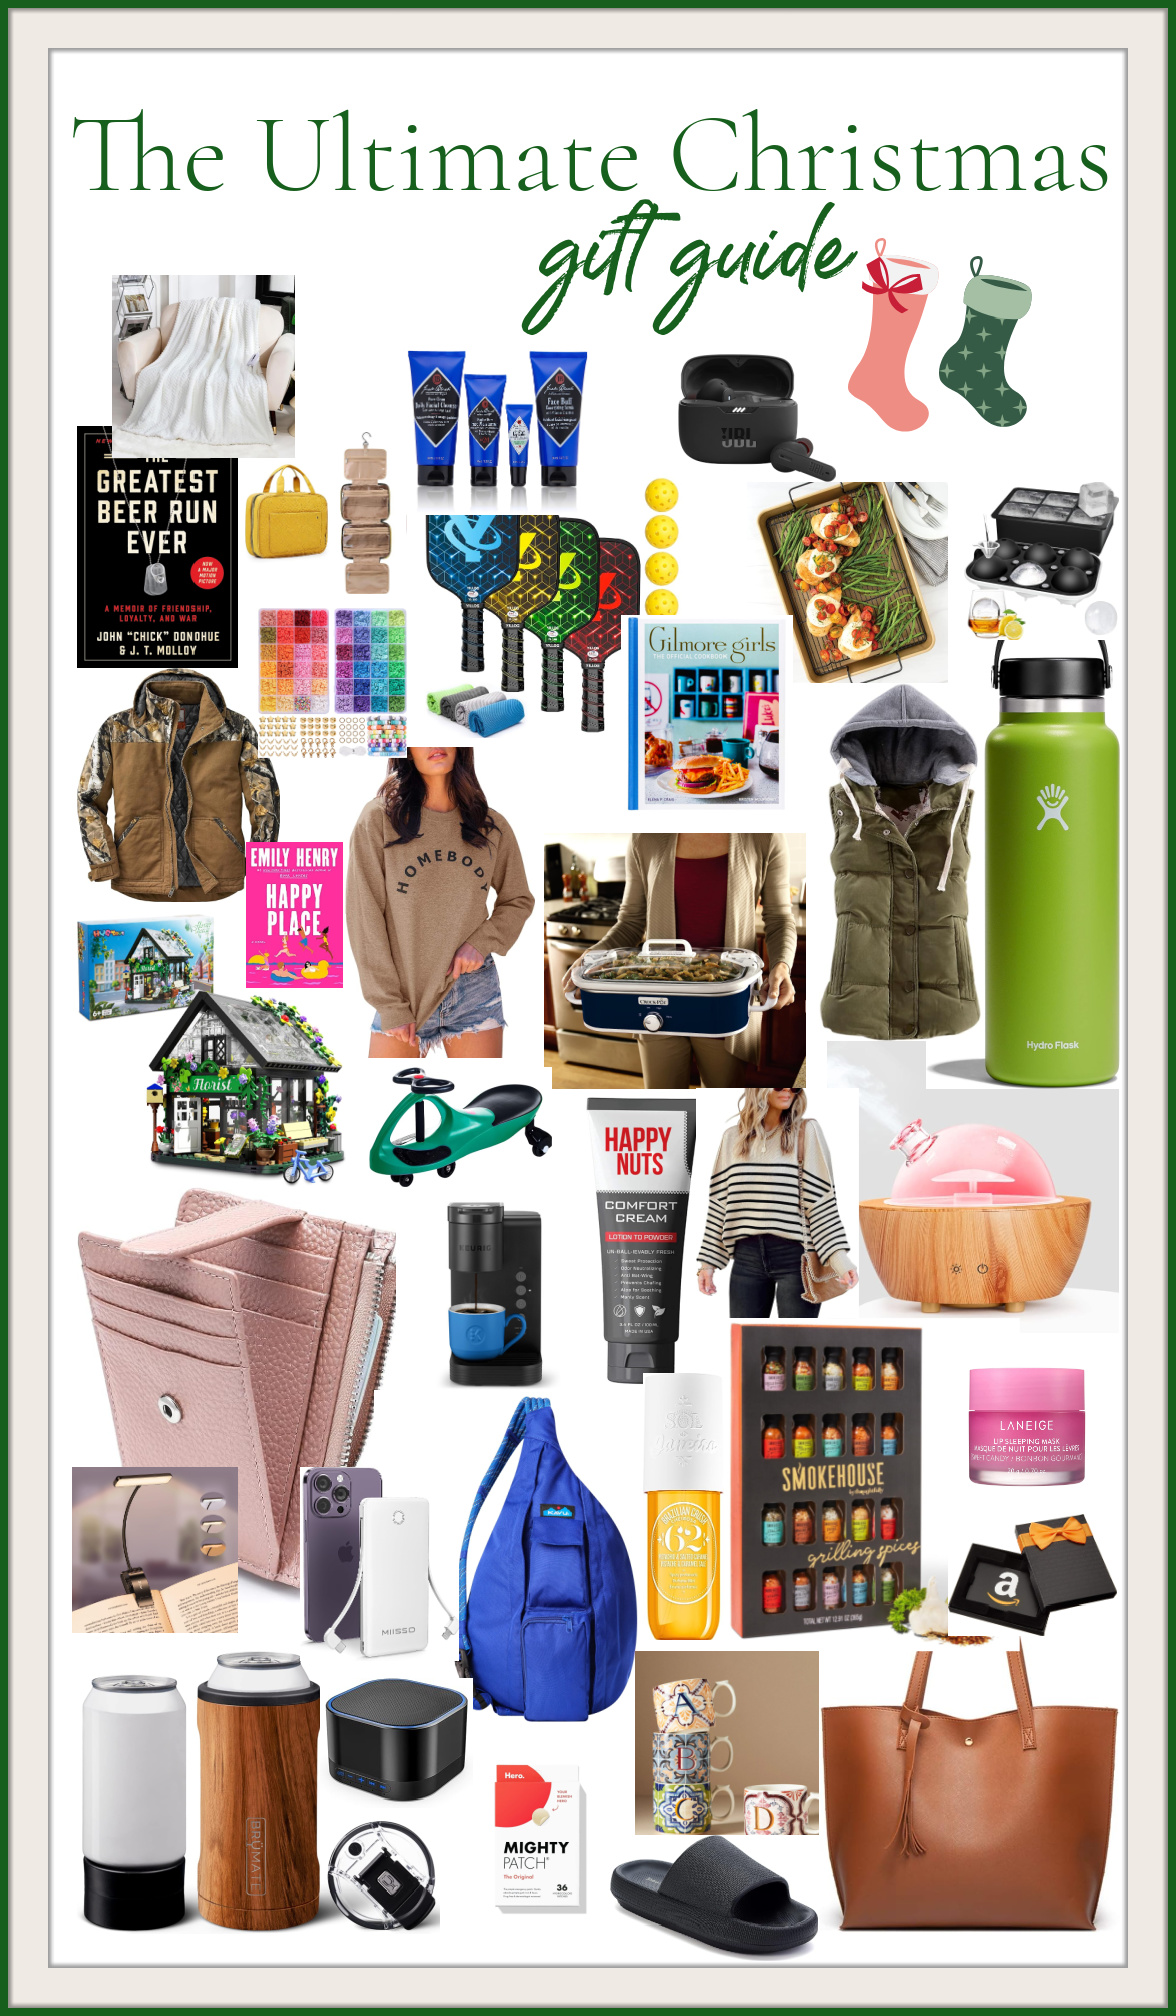 Fun Gifts for Women: The Ultimate Guide to Do Something Special